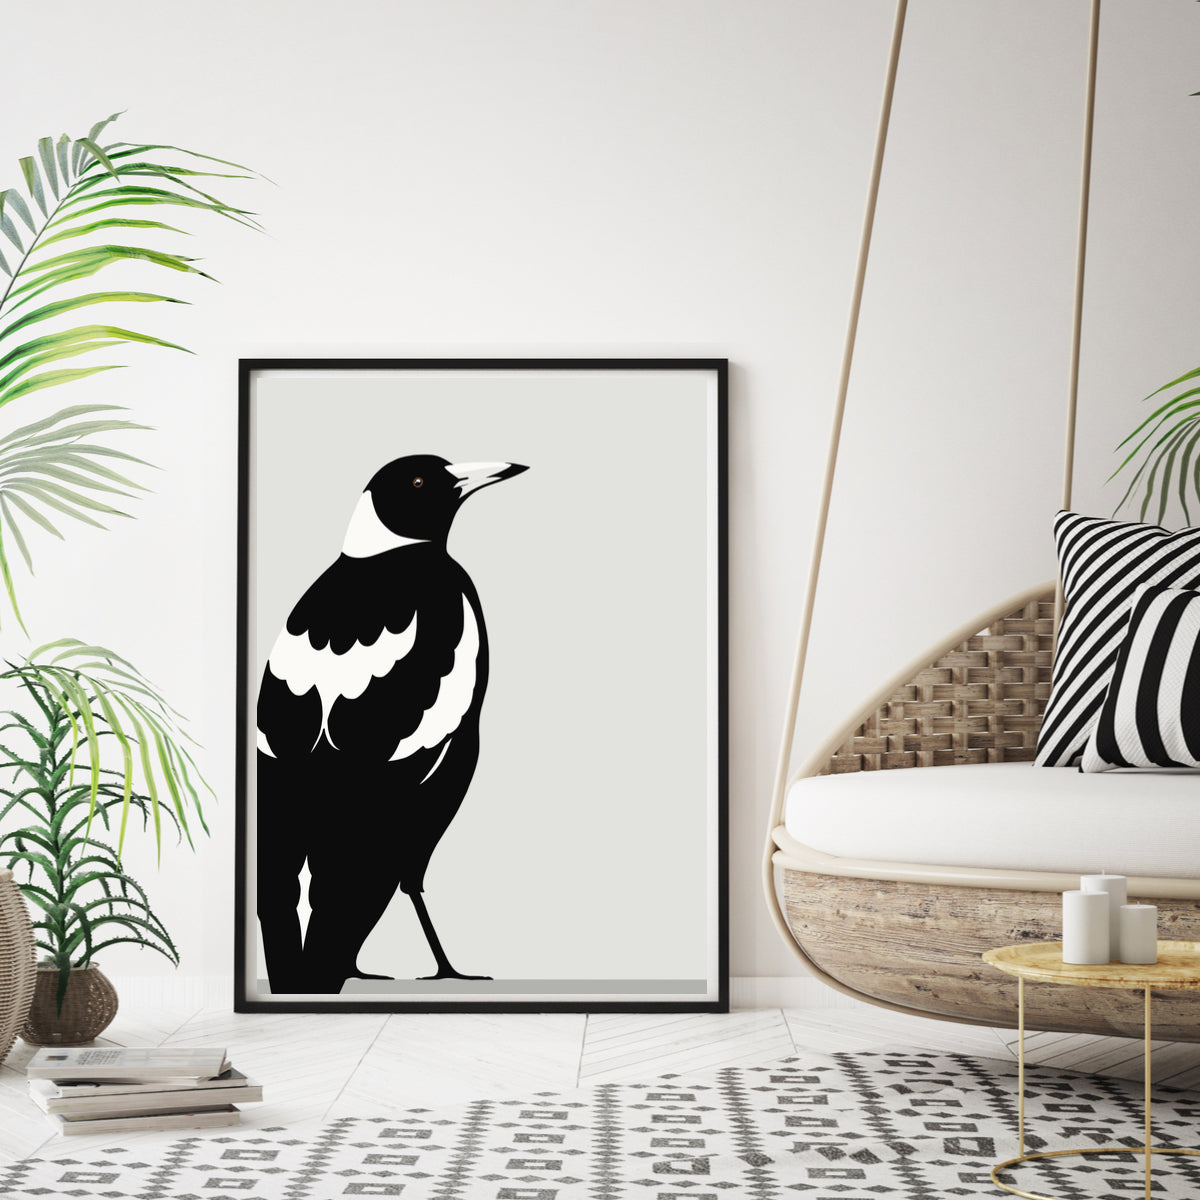 Framed art print of the Magpie bird, by Hansby Design New Zealand